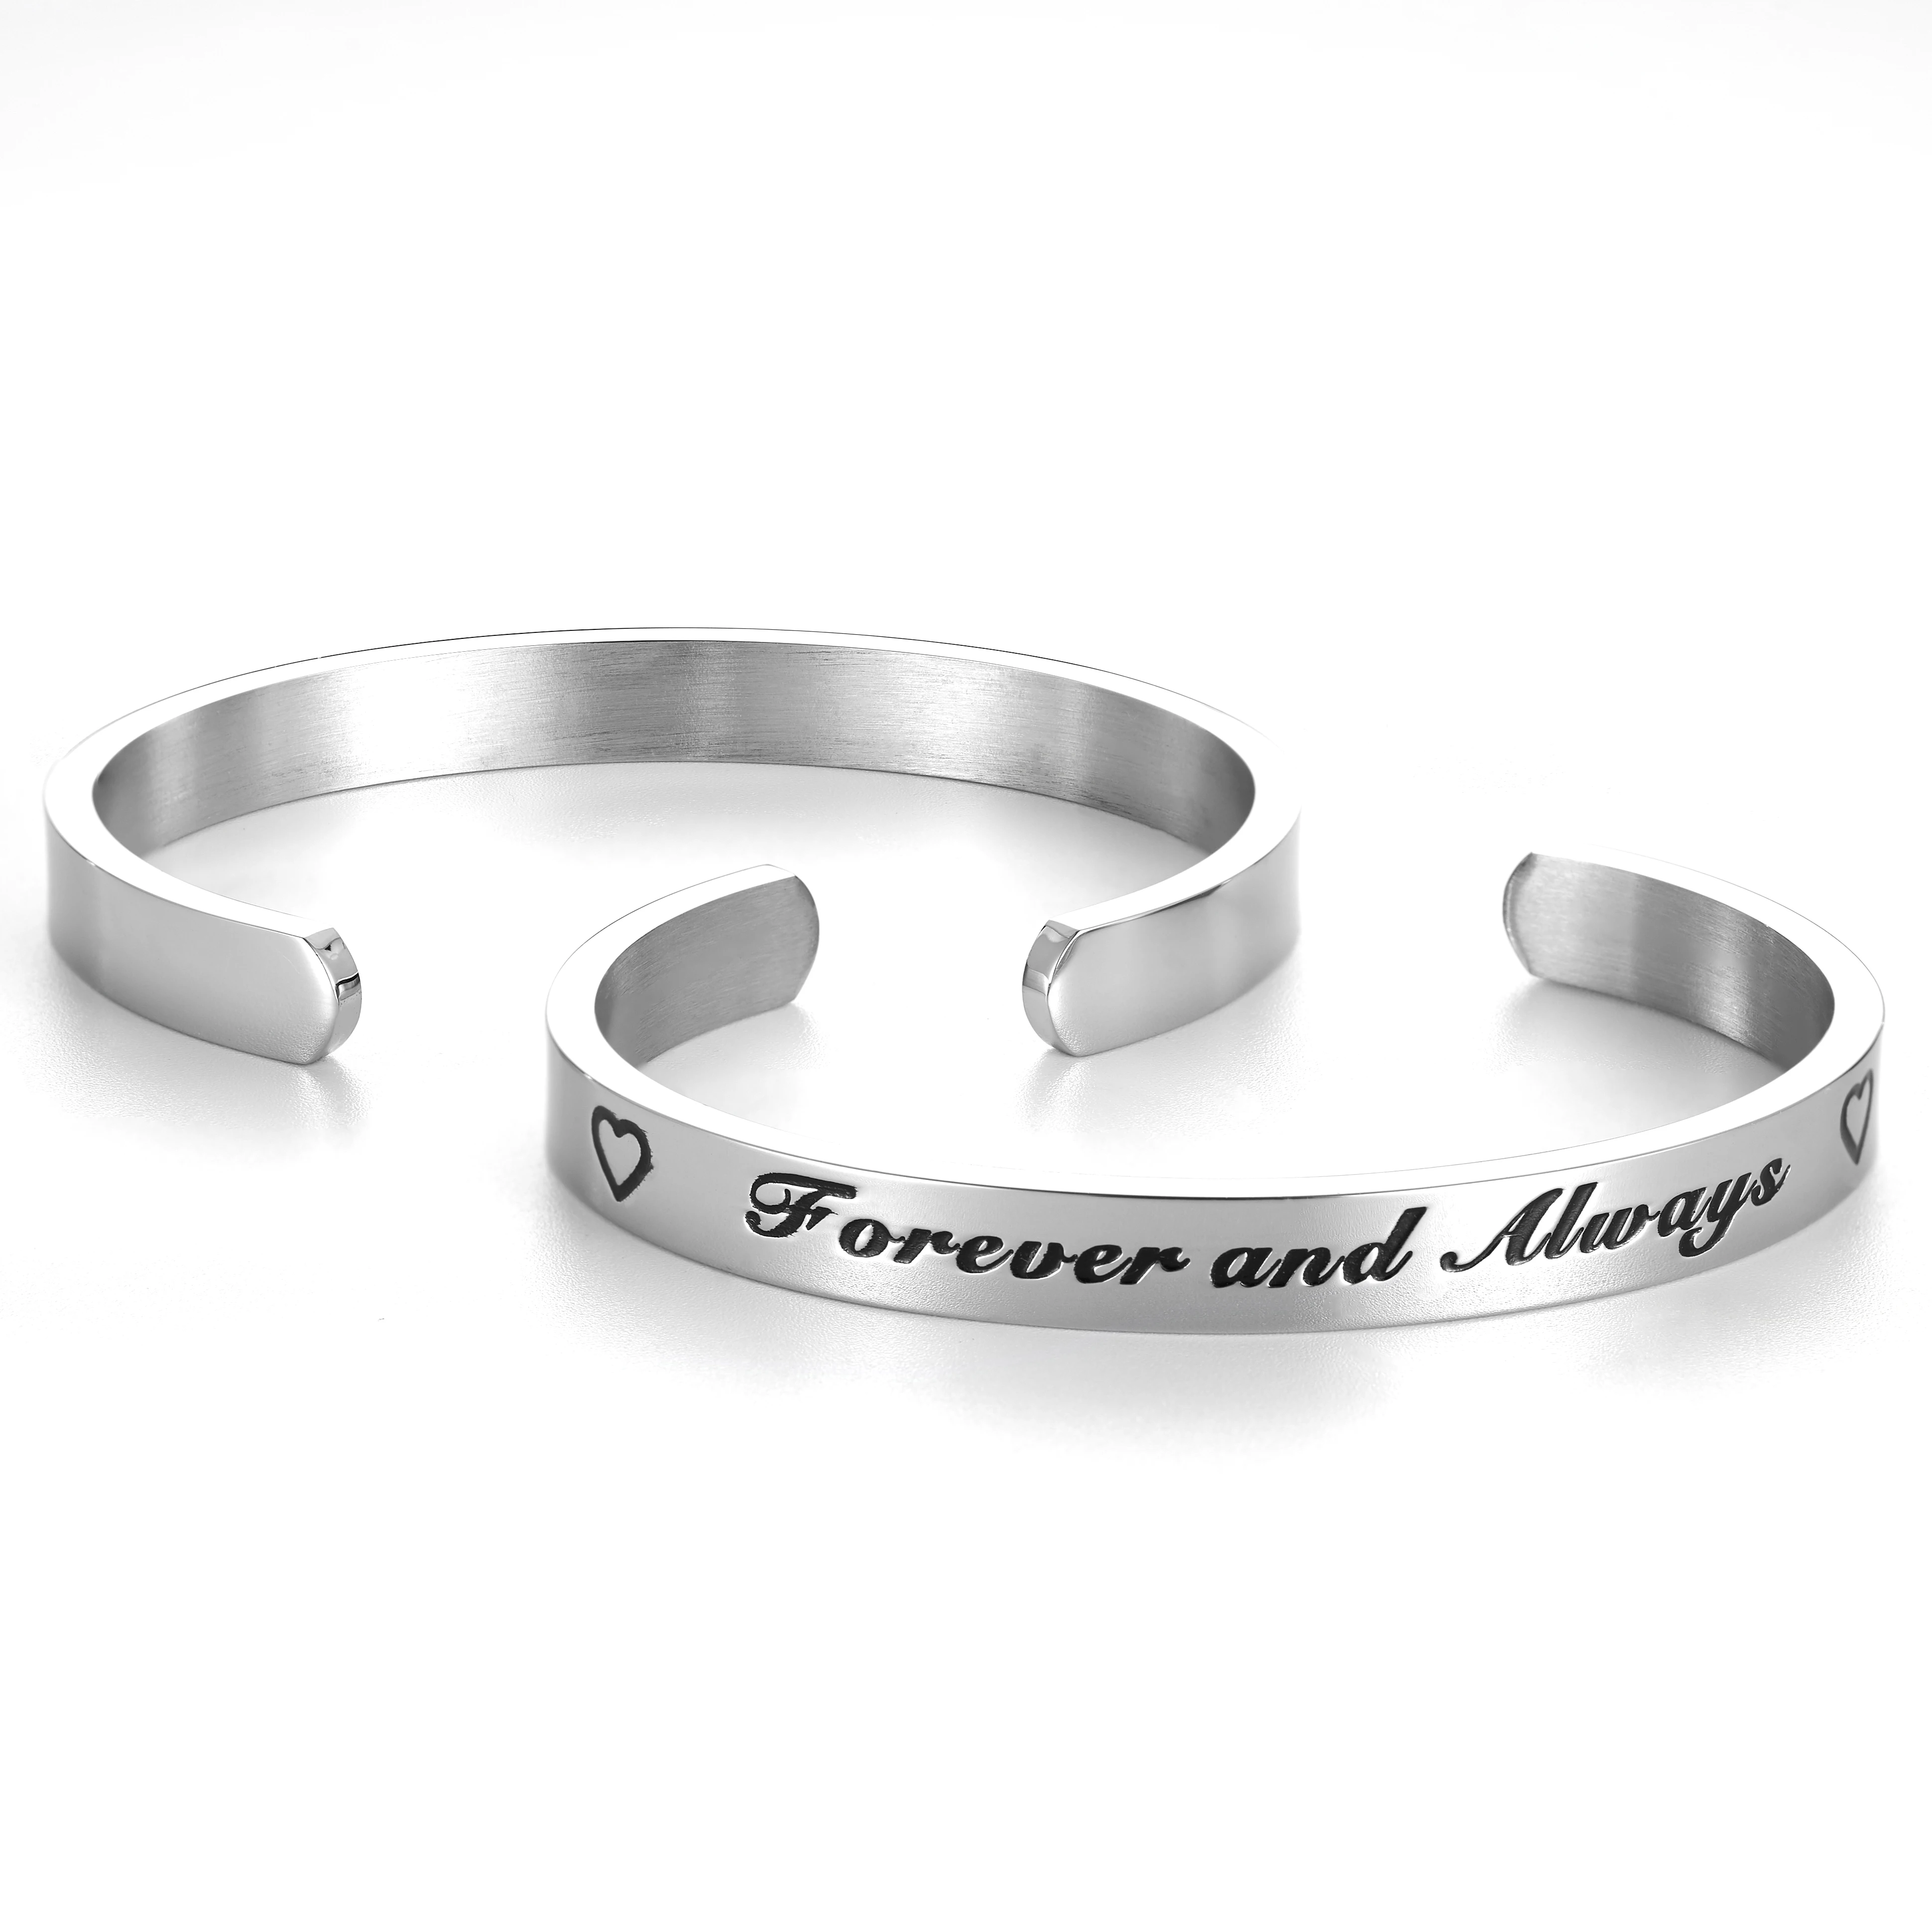 Inspirational Cuff Bracelets Gifts for Women Girls Personalized Motivational Mantra Engraved Stainless Steel Jewelry 